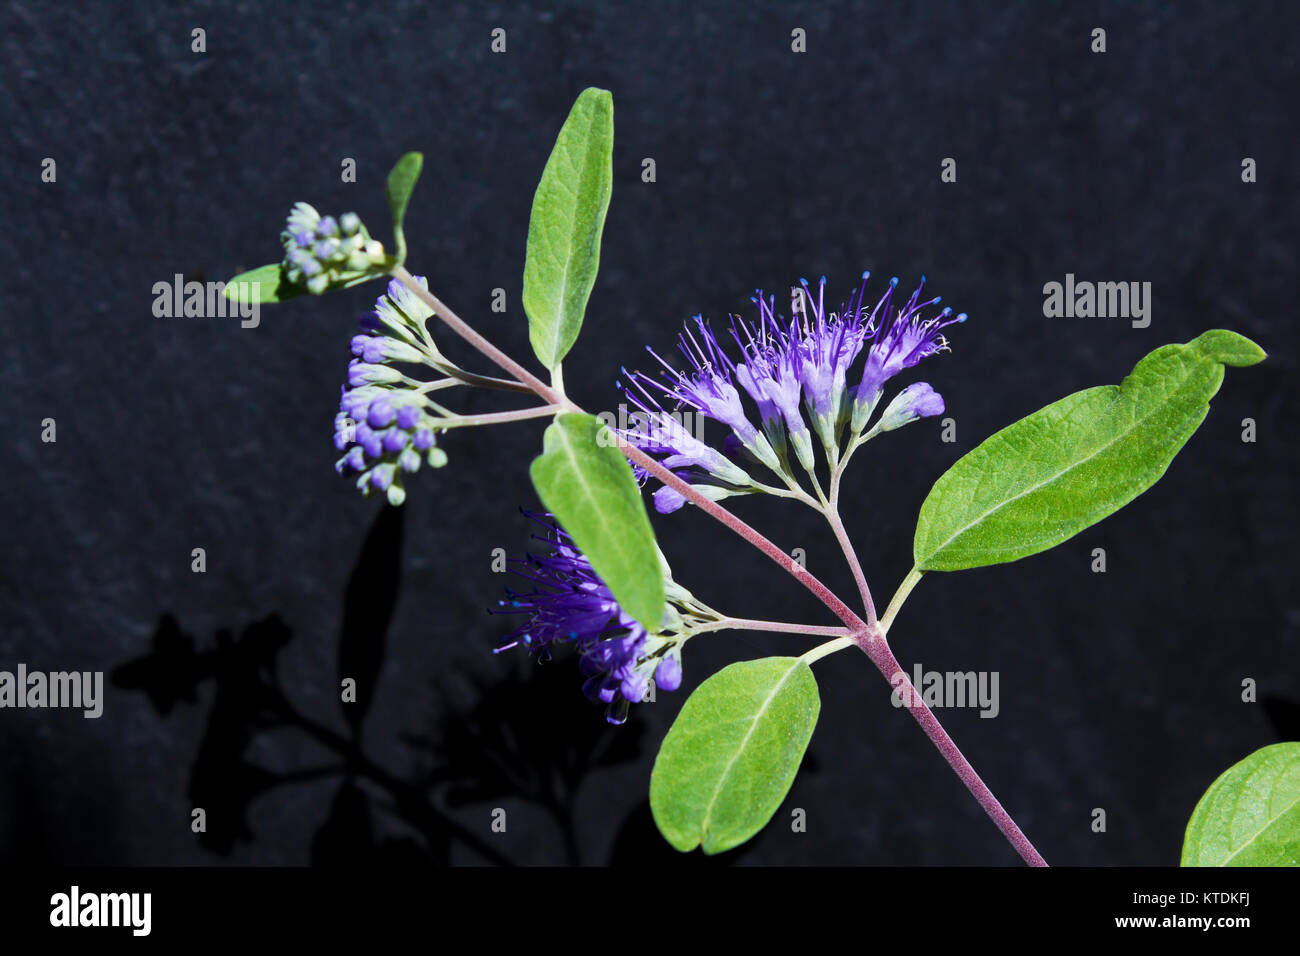 Caryopteris clandonensis in front of dark background Stock Photo